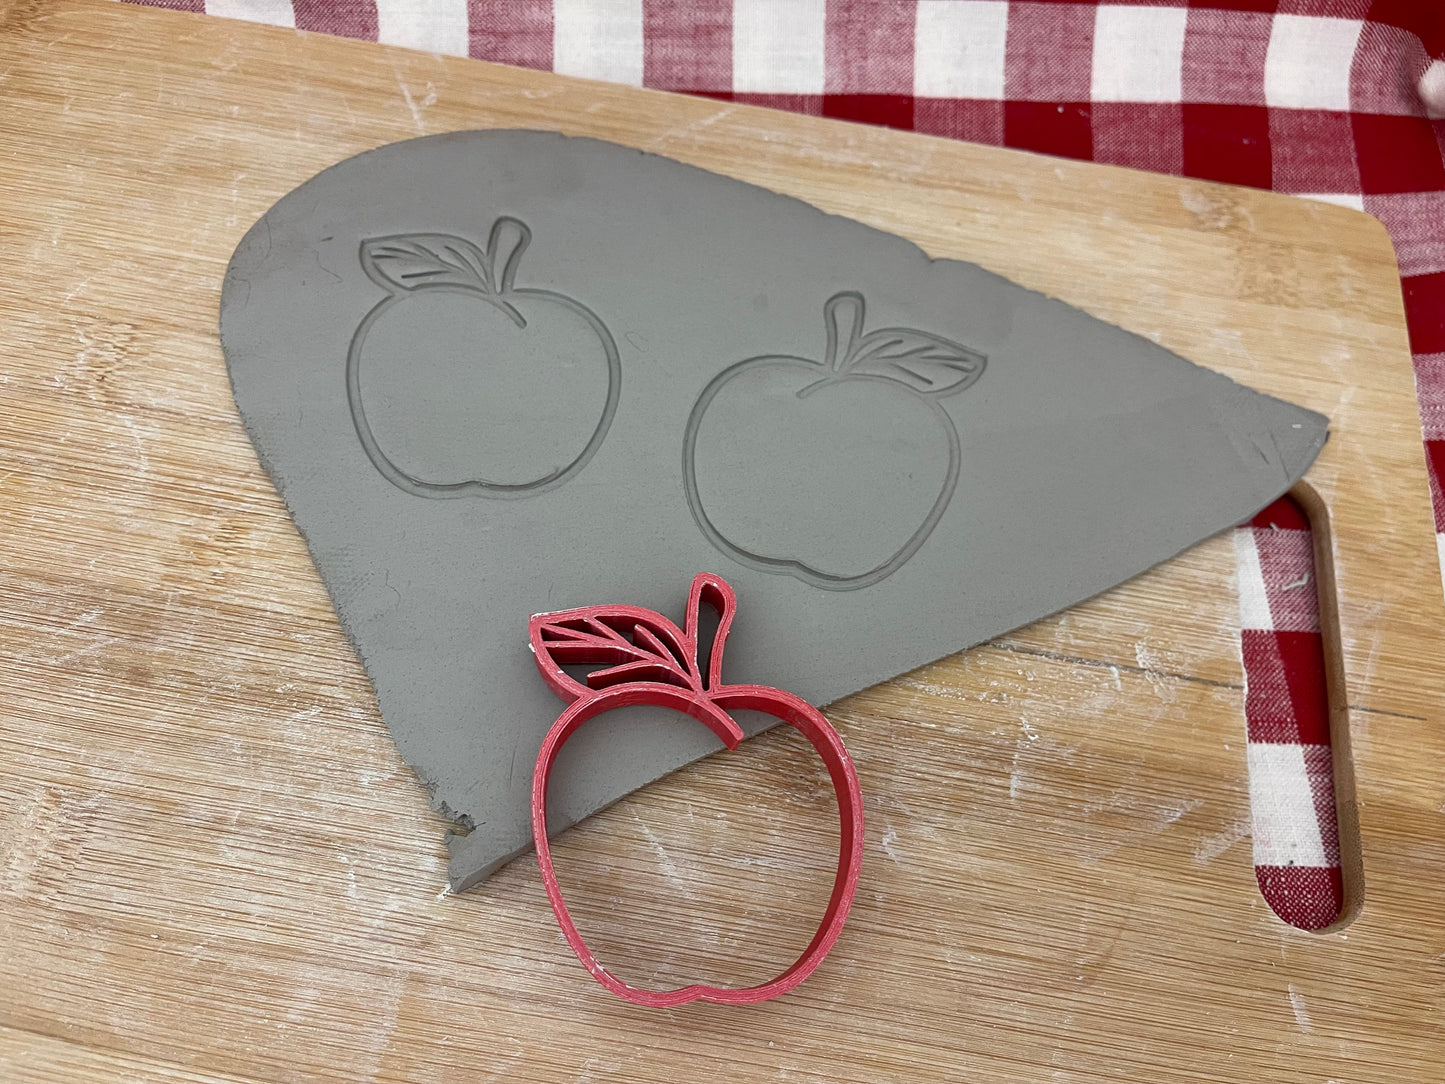 Apple pottery stamp - Pottery Tool, plastic 3d printed, multiple sizes available